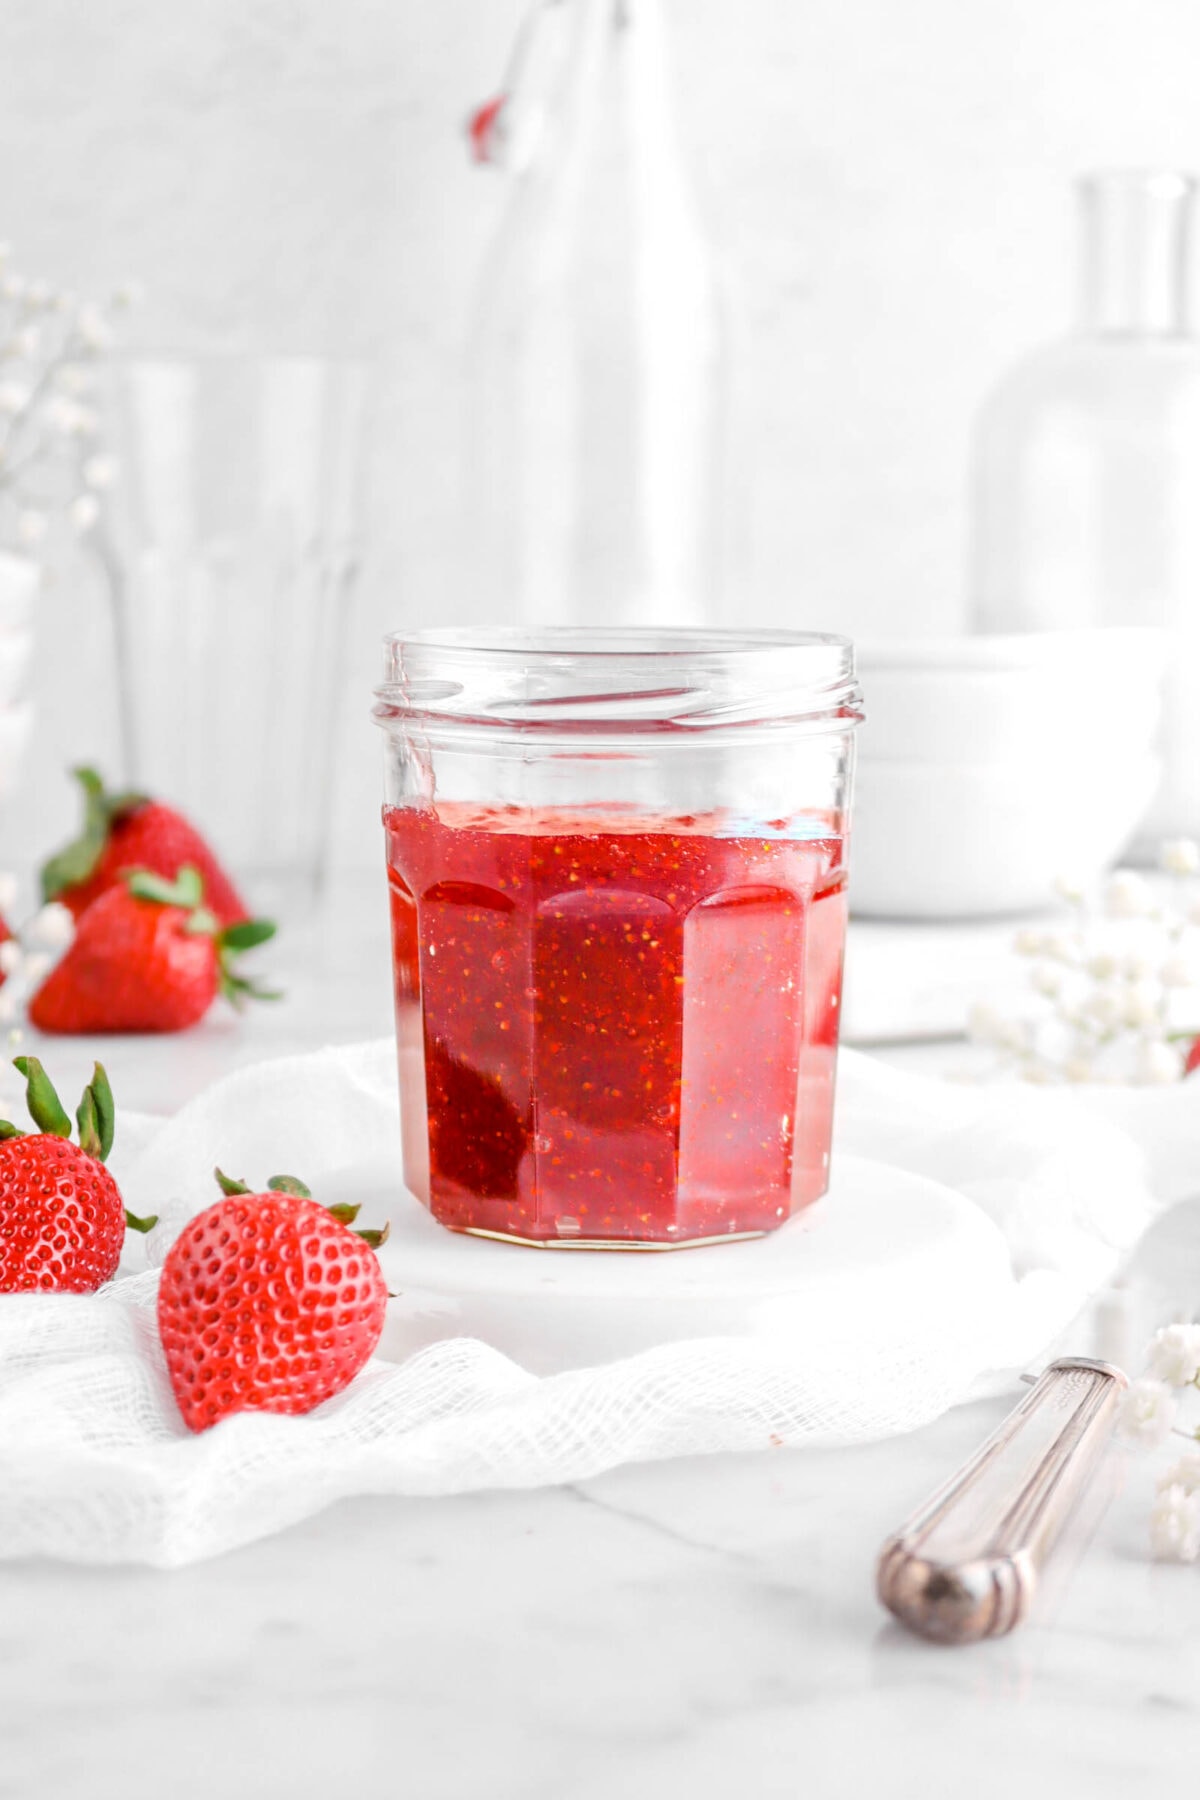 close up of jar of jam on upside down white plate with fresh strawberries beside